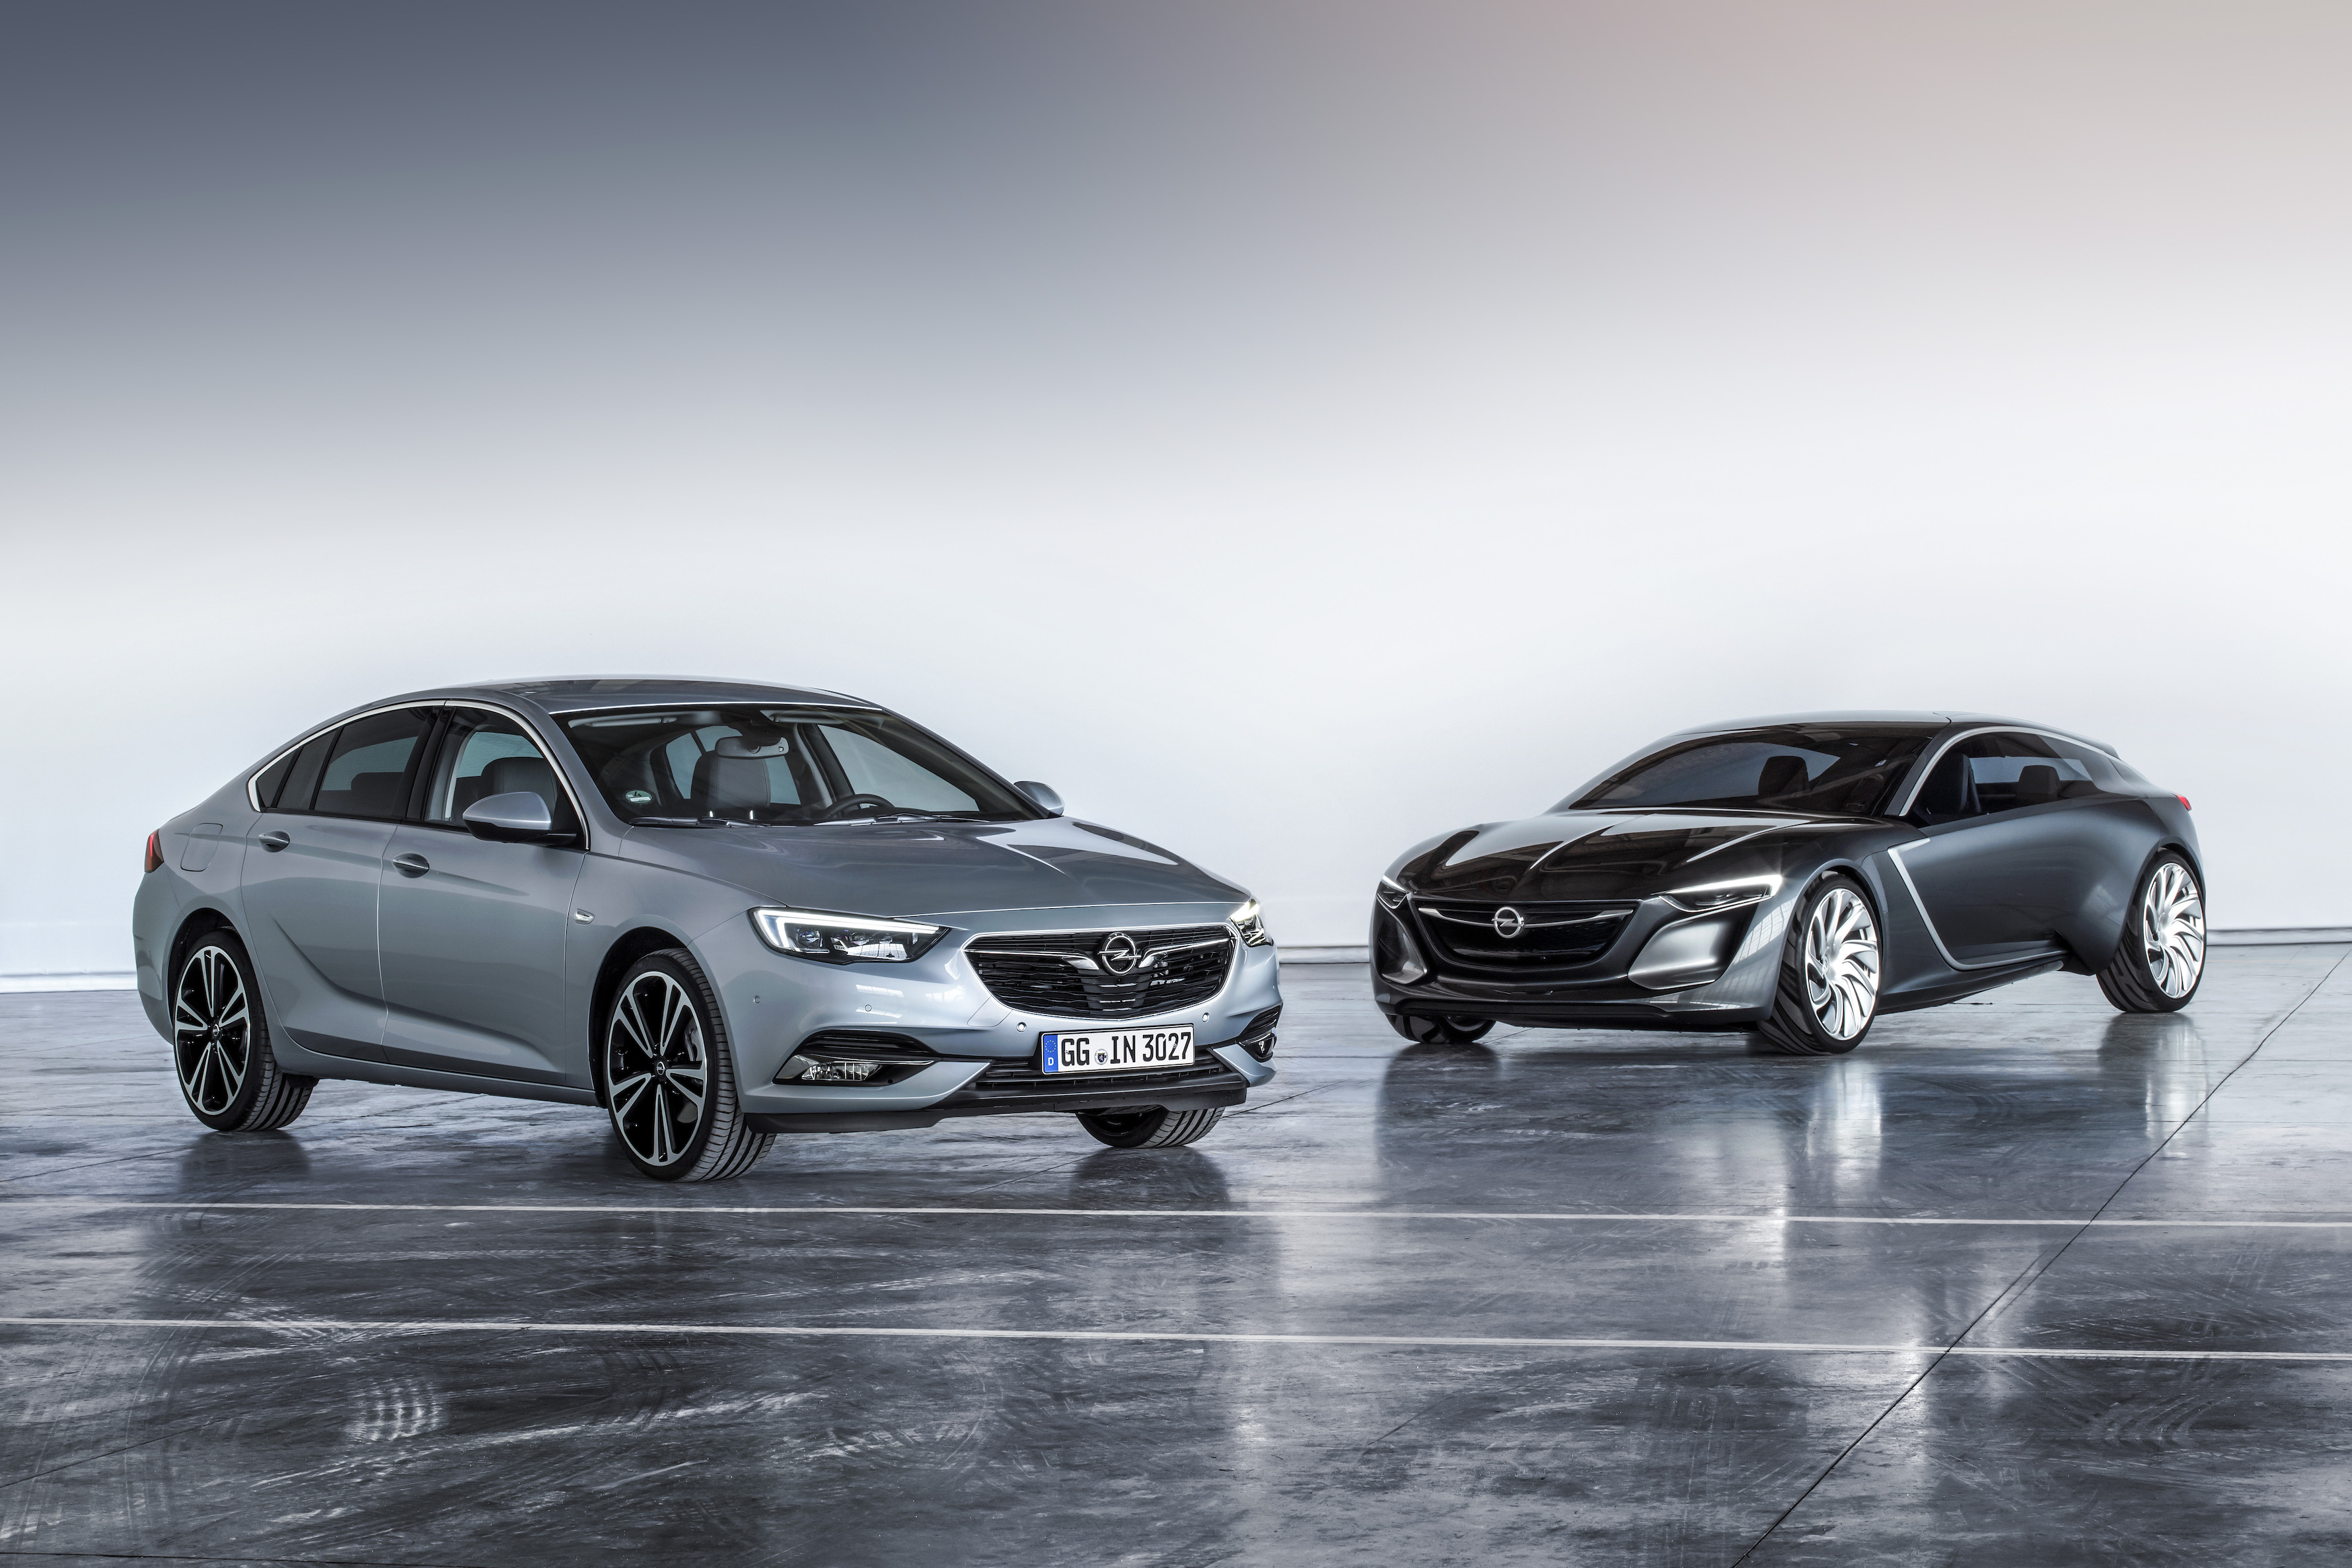 Opel Insignia Grand Sport mod specifications